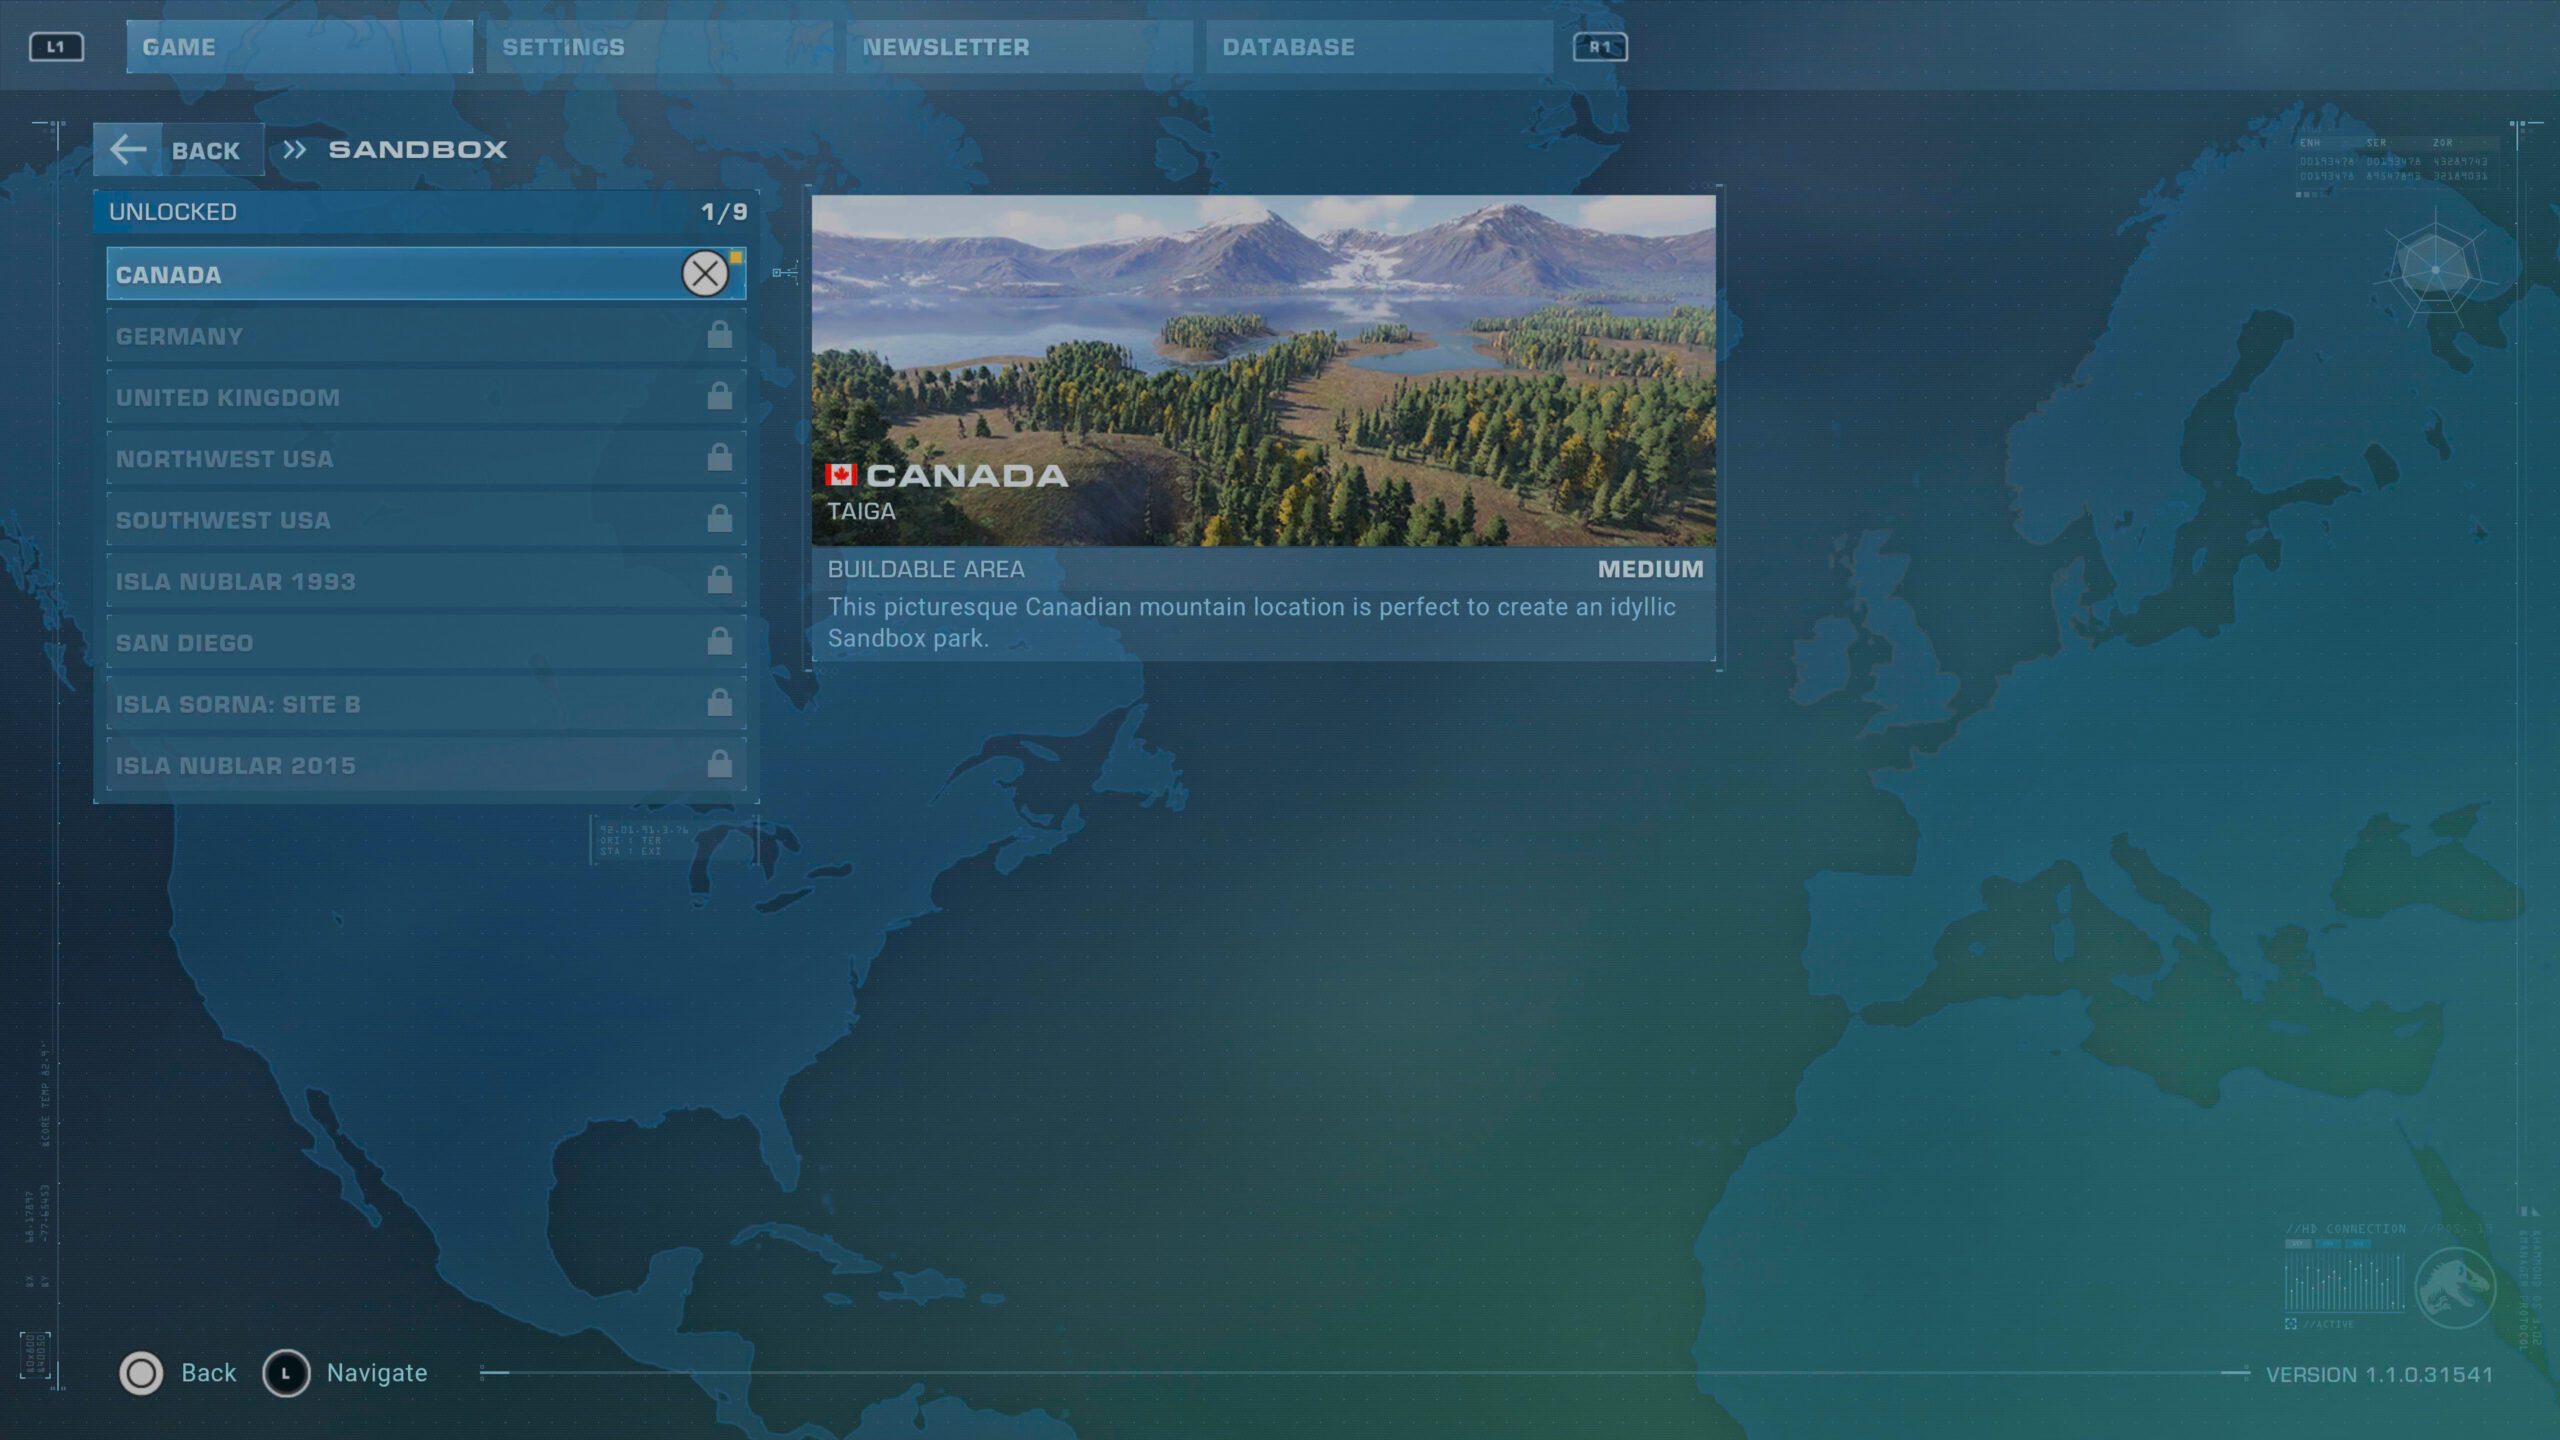 A list of the sandbox regions available in Jurassic World Evolution 2